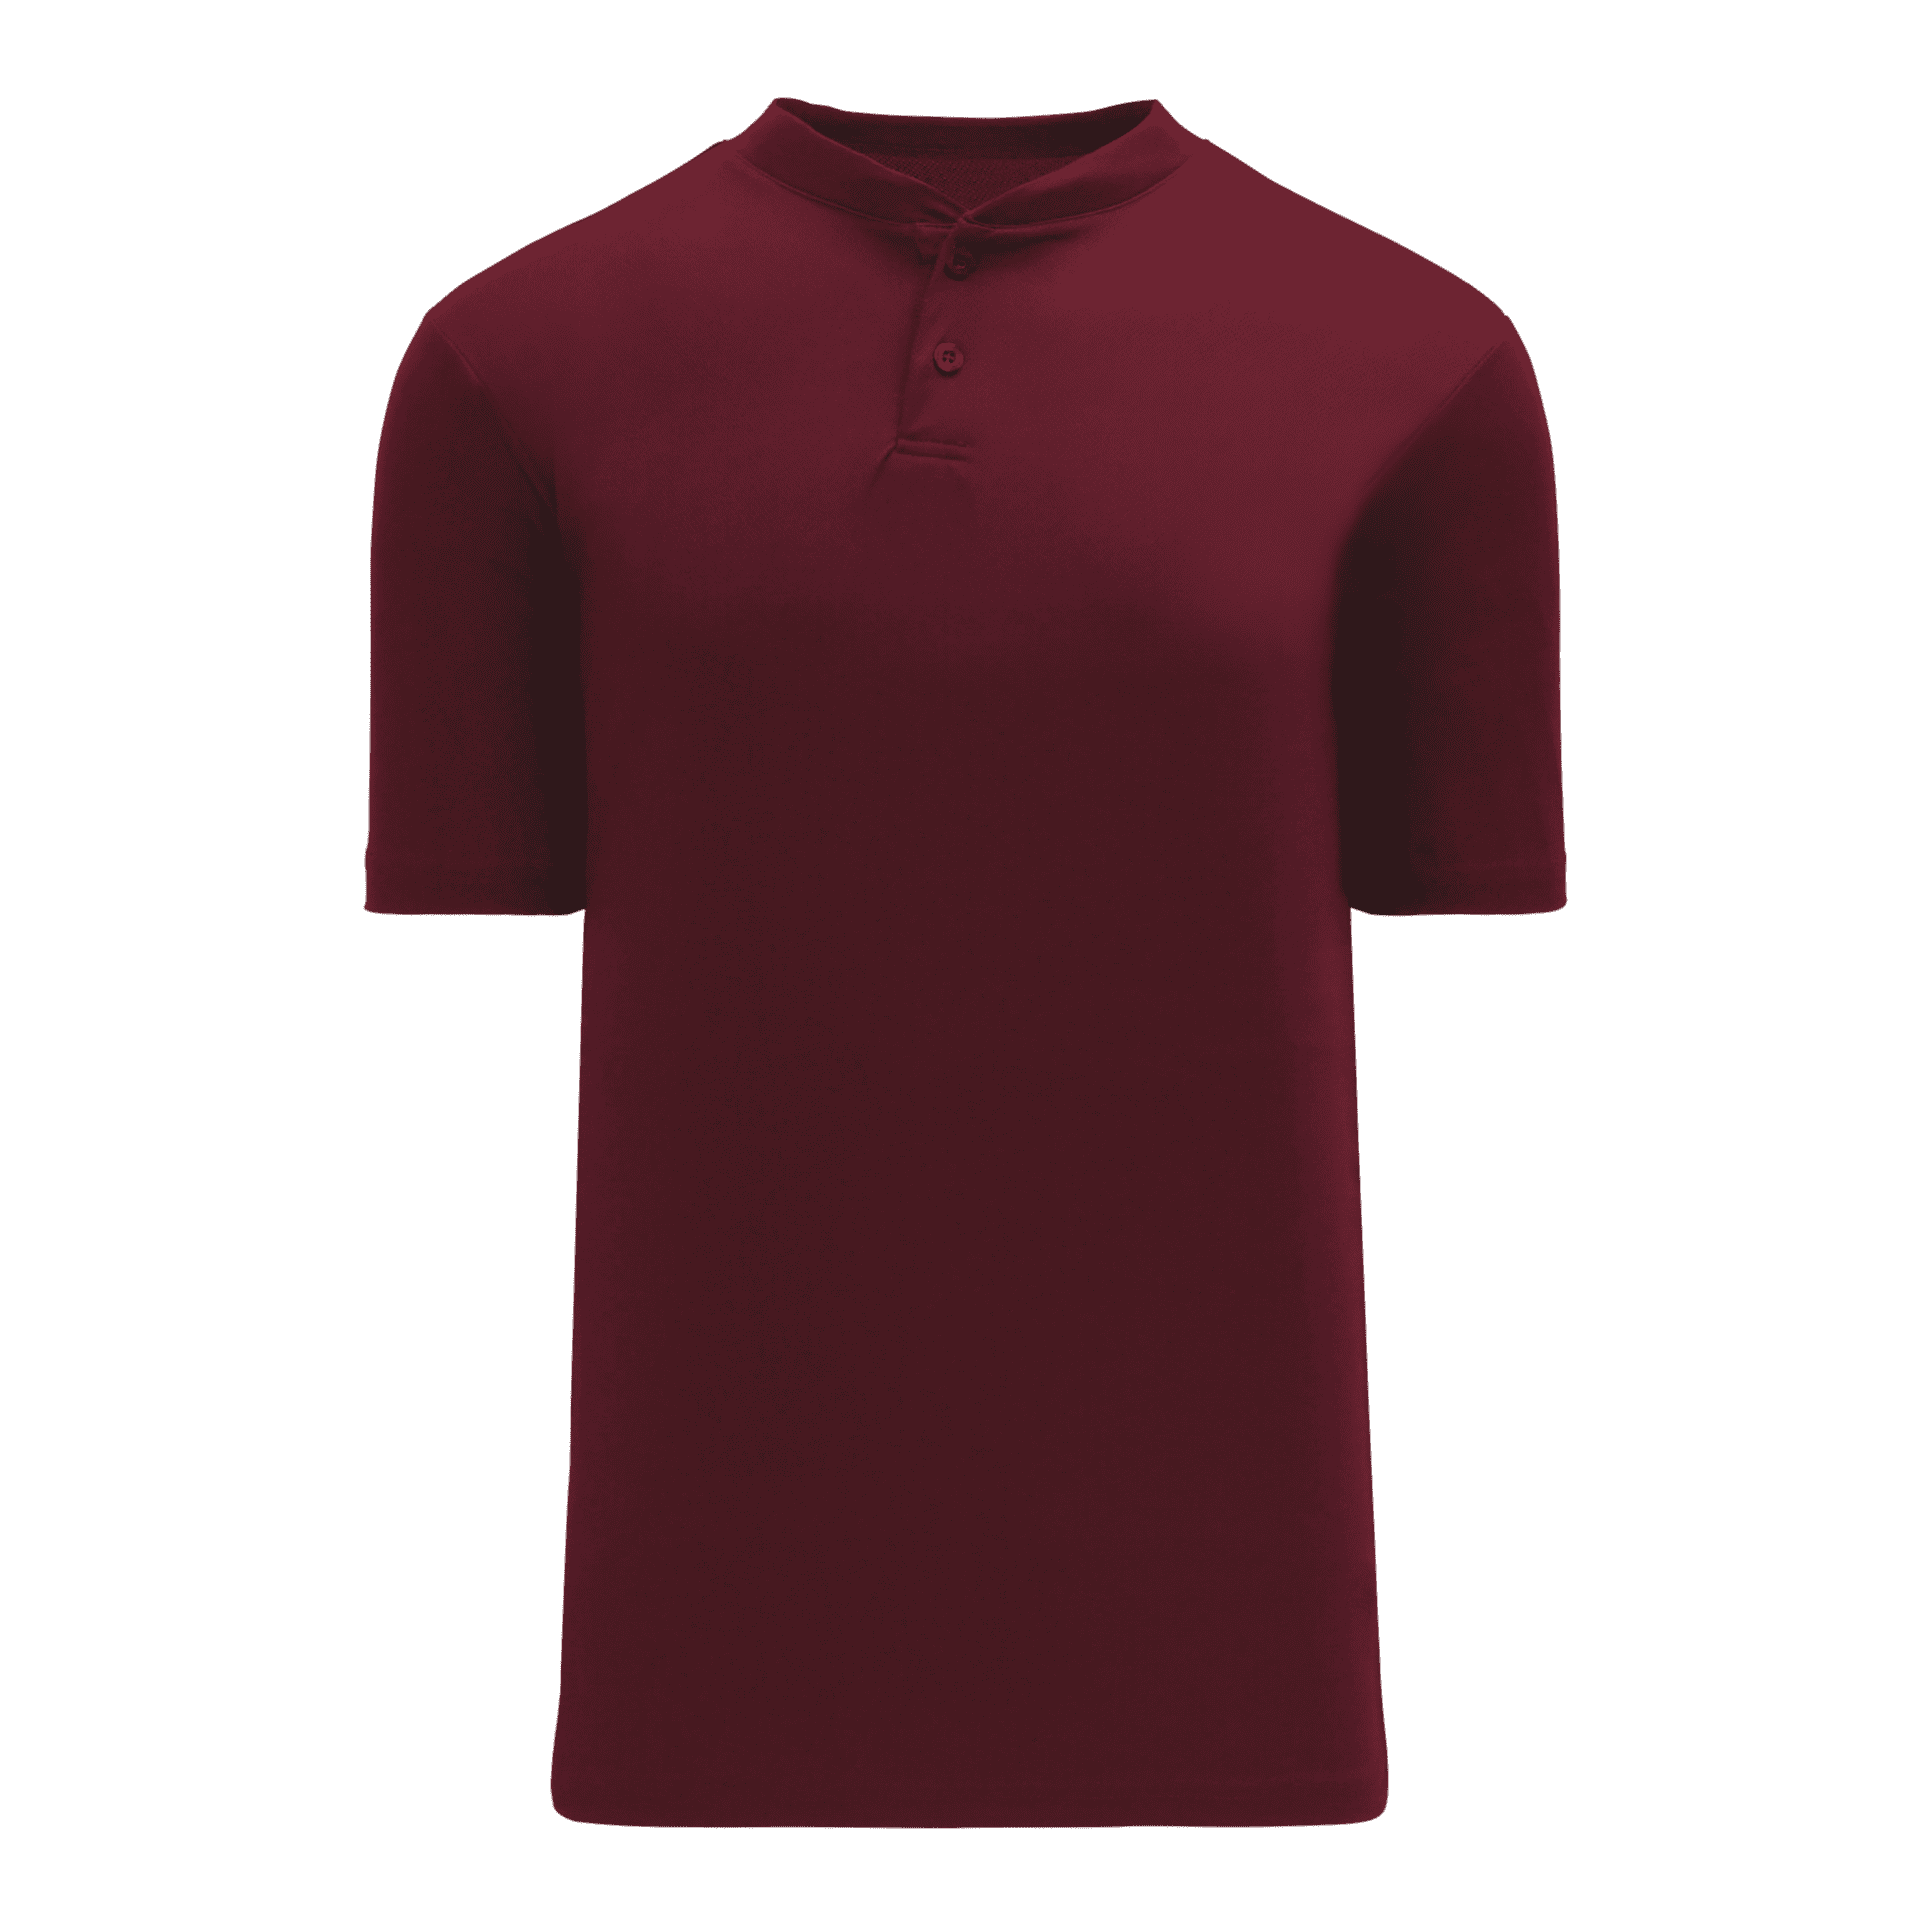 ATHLETIC KNIT TWO BUTTON BASEBALL JERSEY #BA1347 Maroon